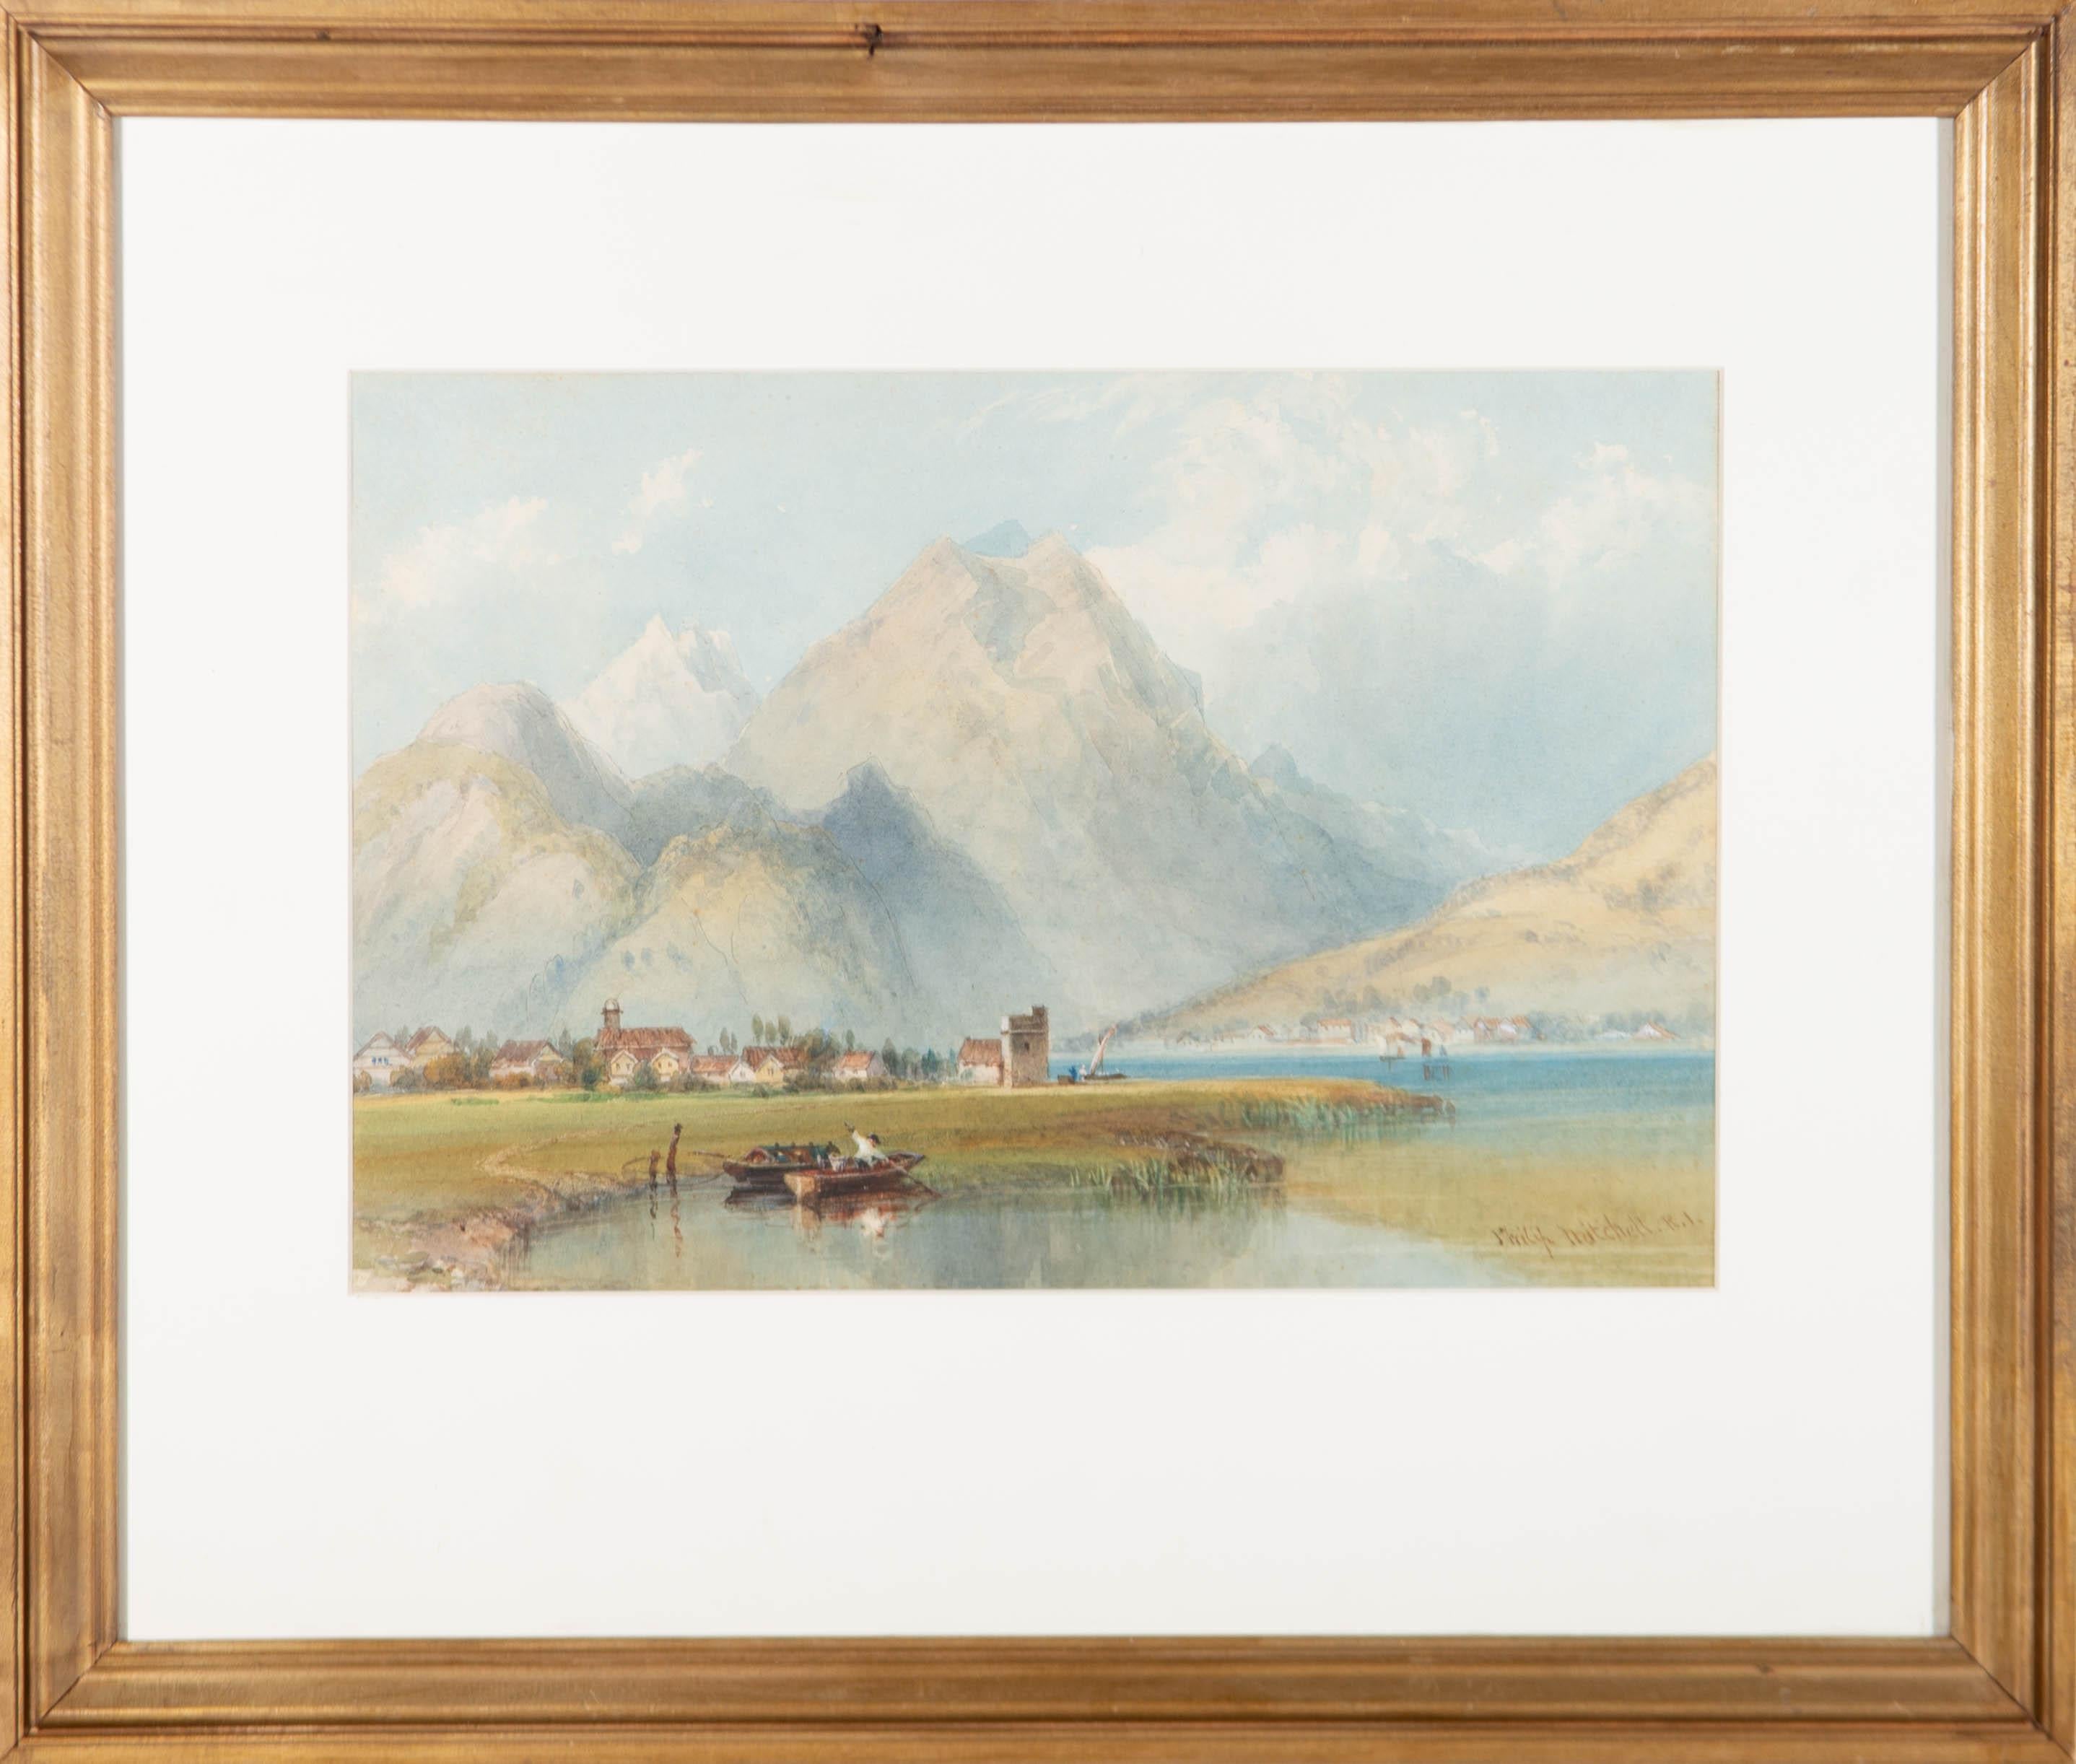 A delightful continental landscape by the British artist Philip Mitchell, depicting a rural village set against large Alpine mountains. Very well presented in a cream card mount and gilt effect frame. Signed to the lower right. On watercolour paper.
